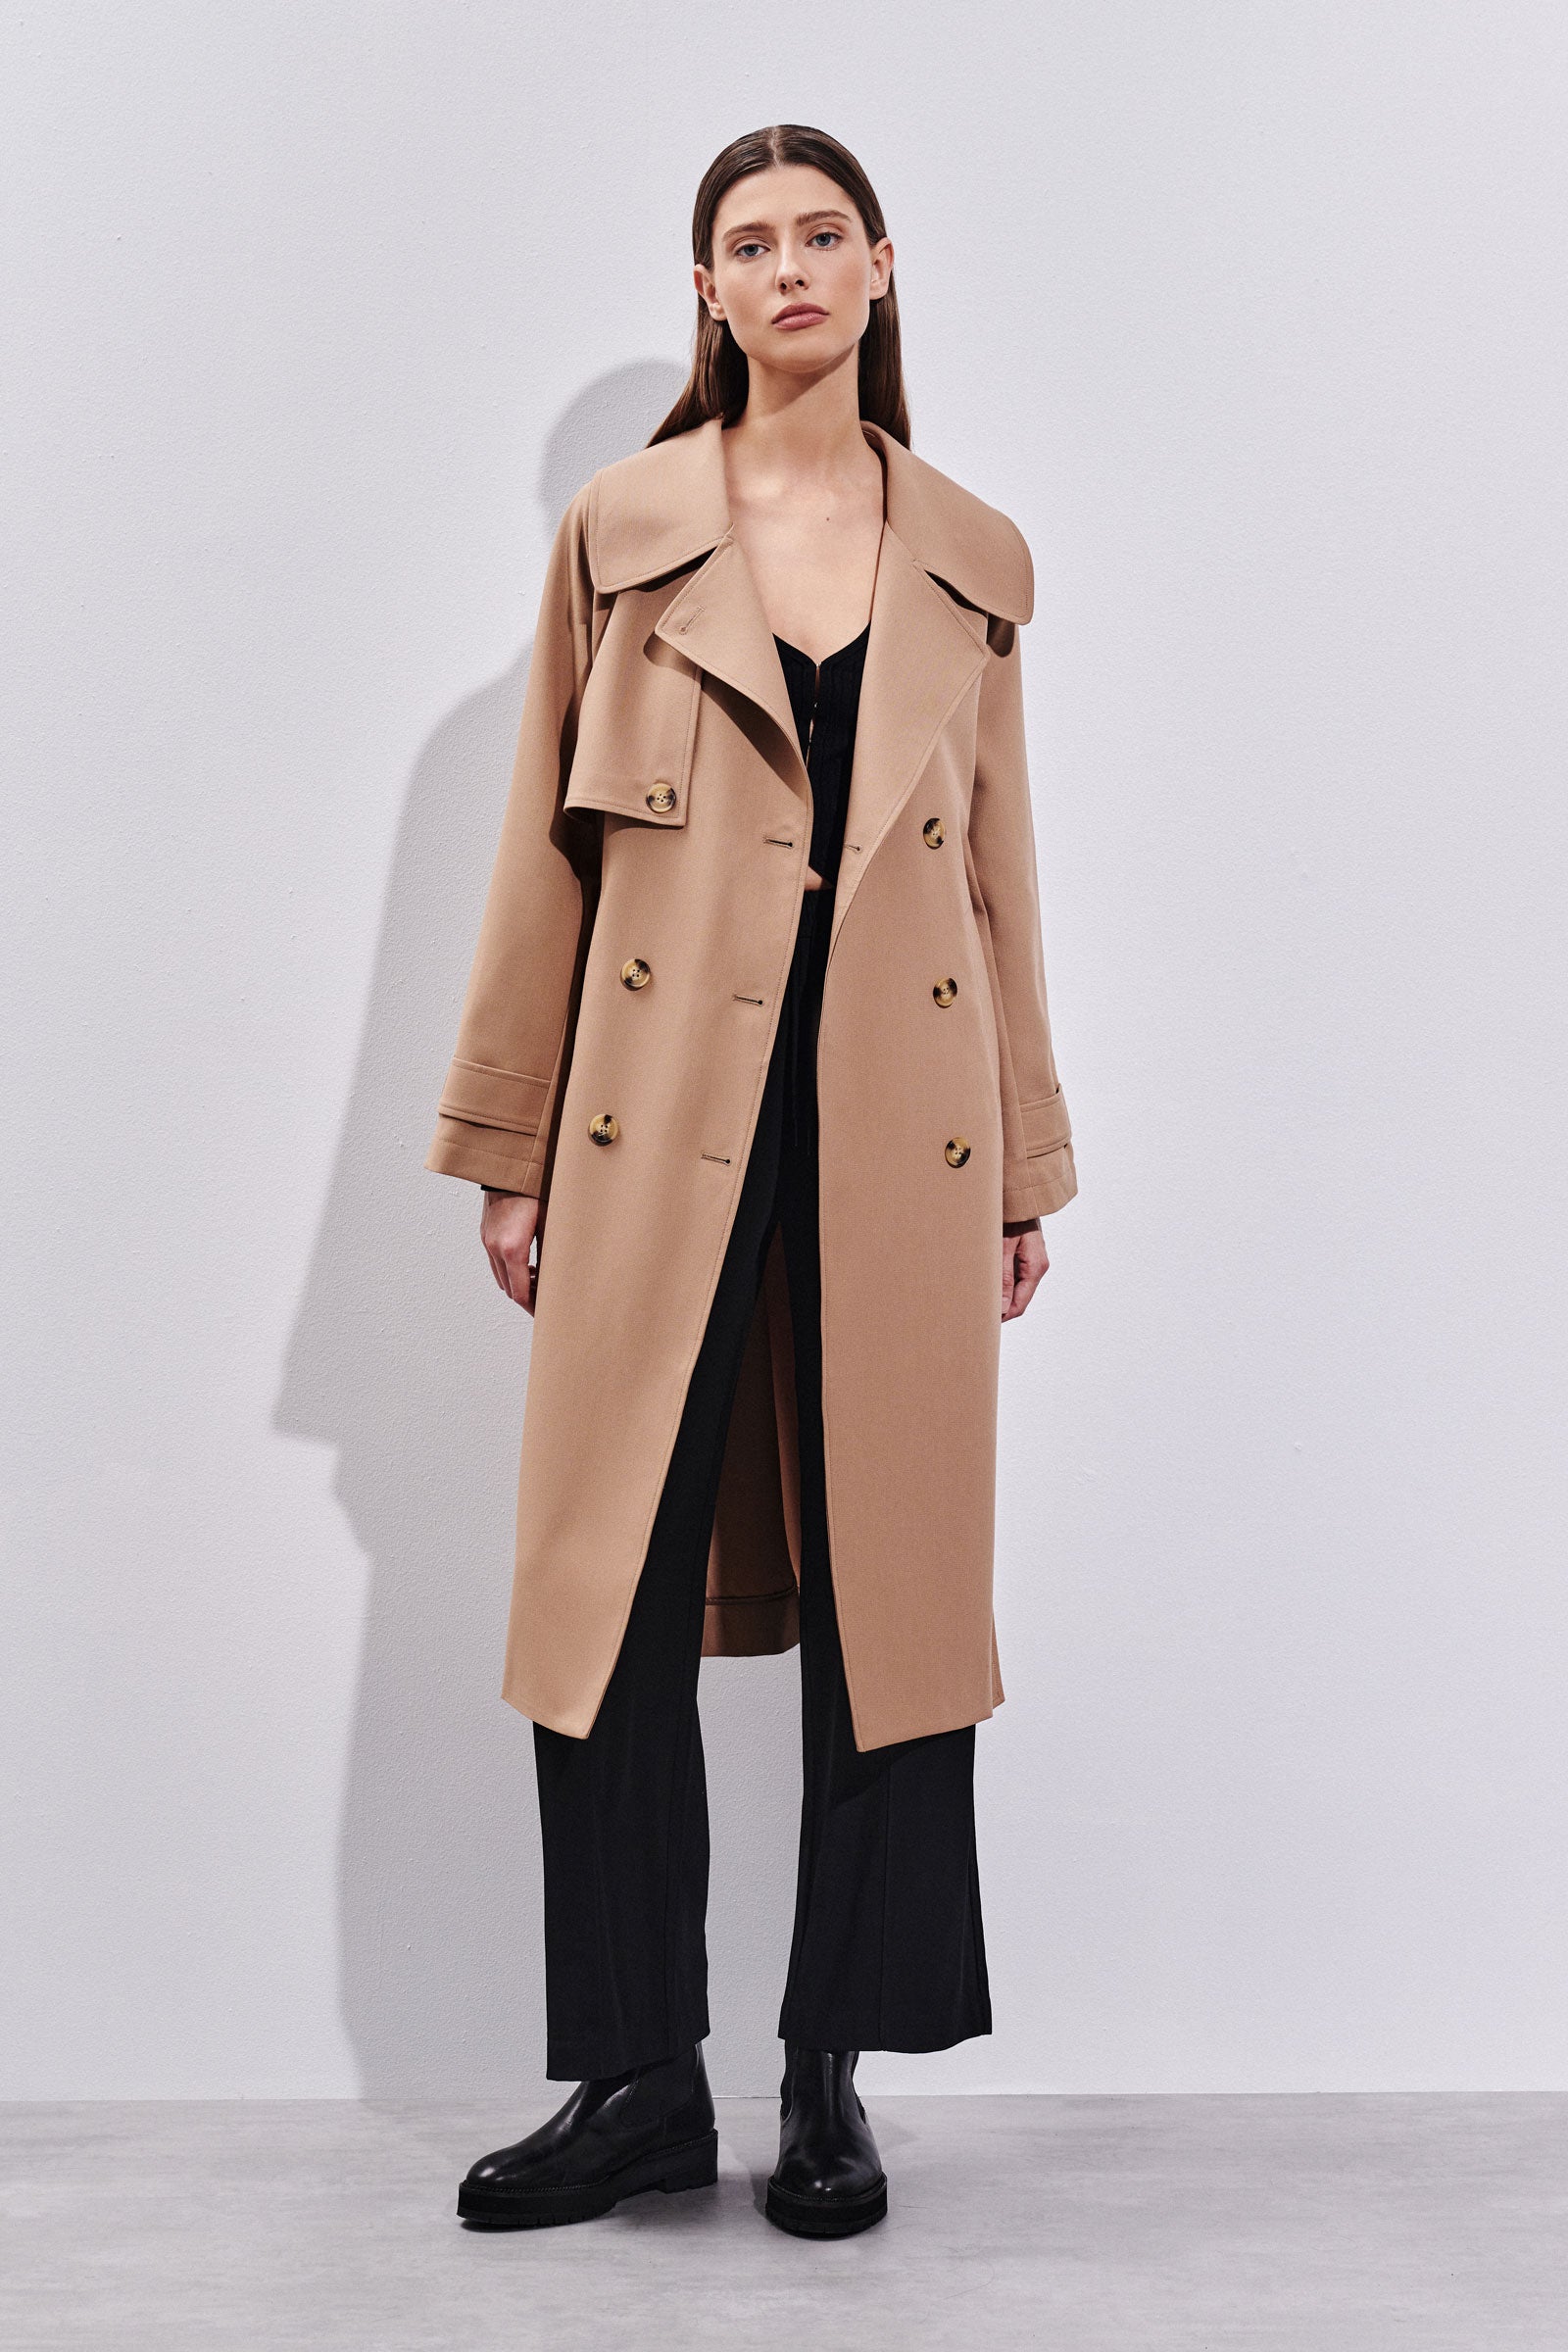 Nude Lucy Camden Trench Coat In a Brown Oak Colour